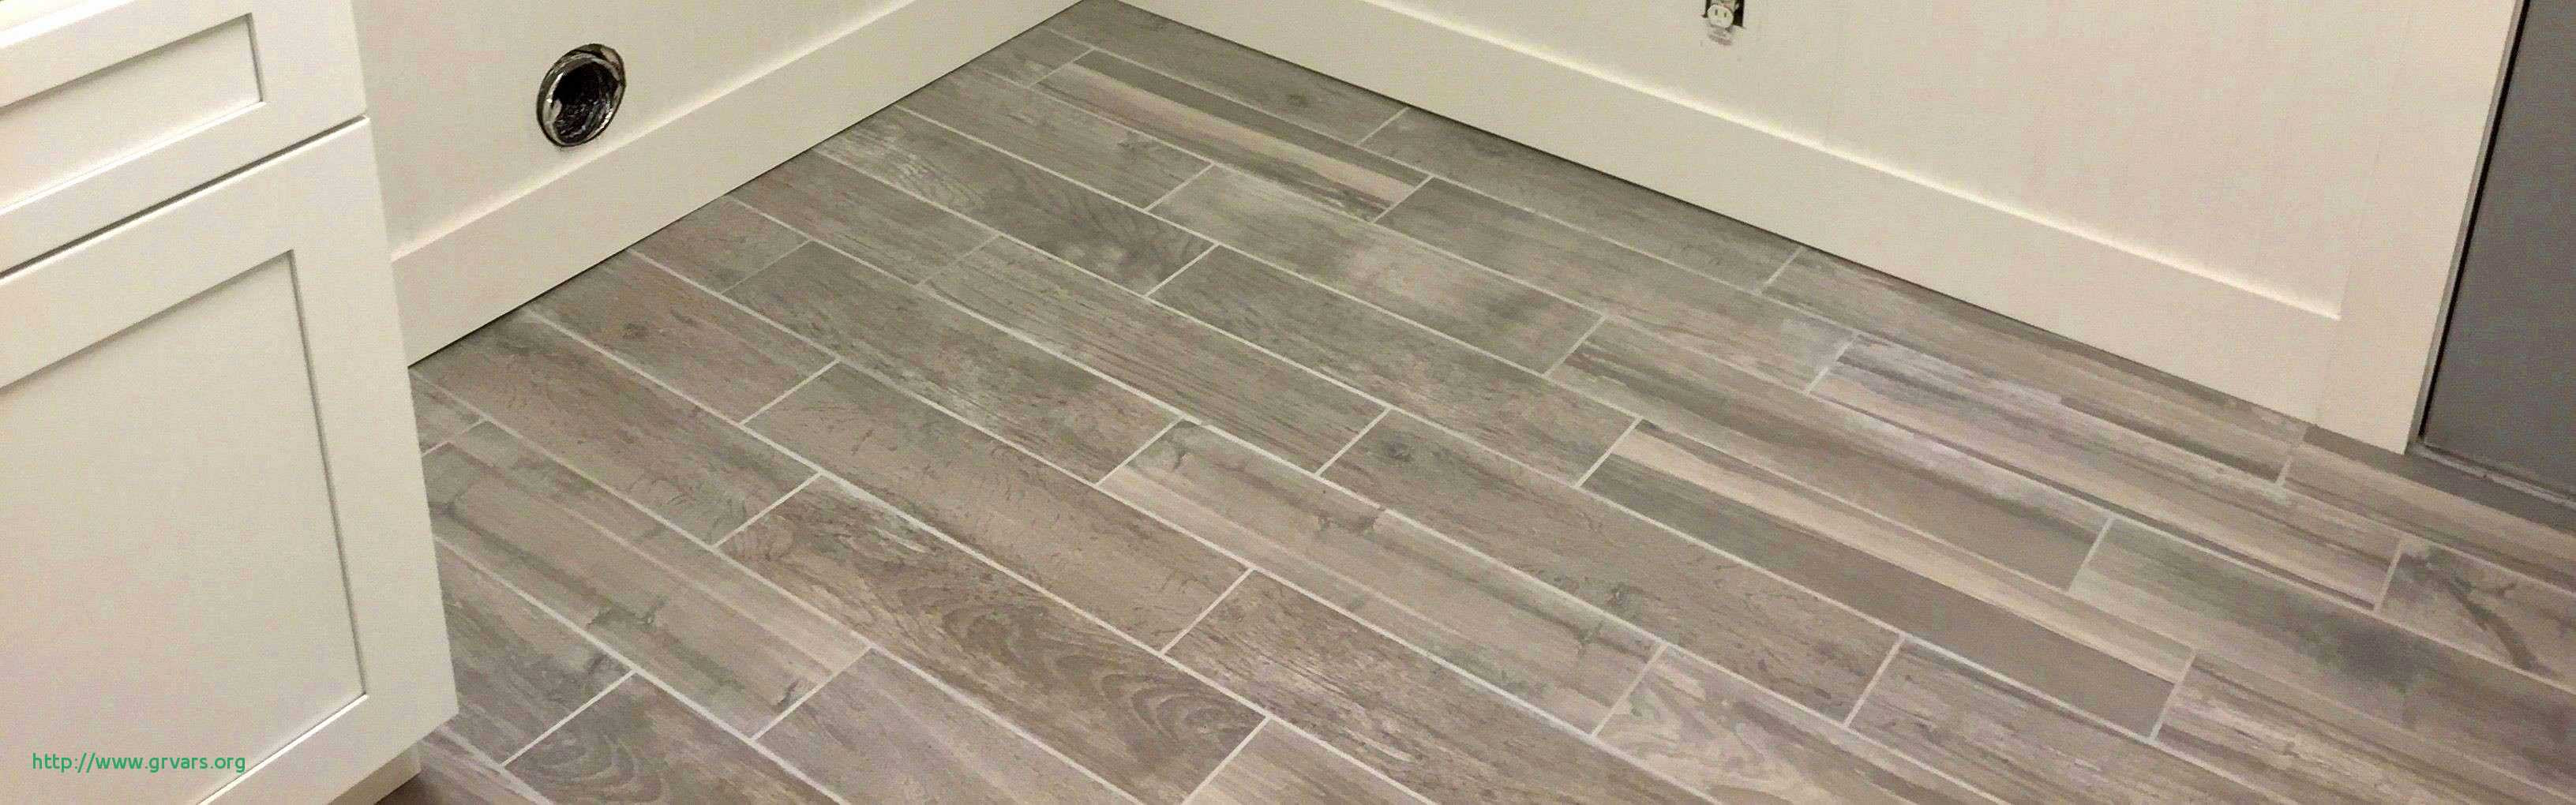 12 Awesome How to Install Hardwood Flooring On Plywood 2024 free download how to install hardwood flooring on plywood of 21 frais laminate flooring installation labor cost per square foot with regard to unique bathroom tiling ideas best h sink install bathroom i 0